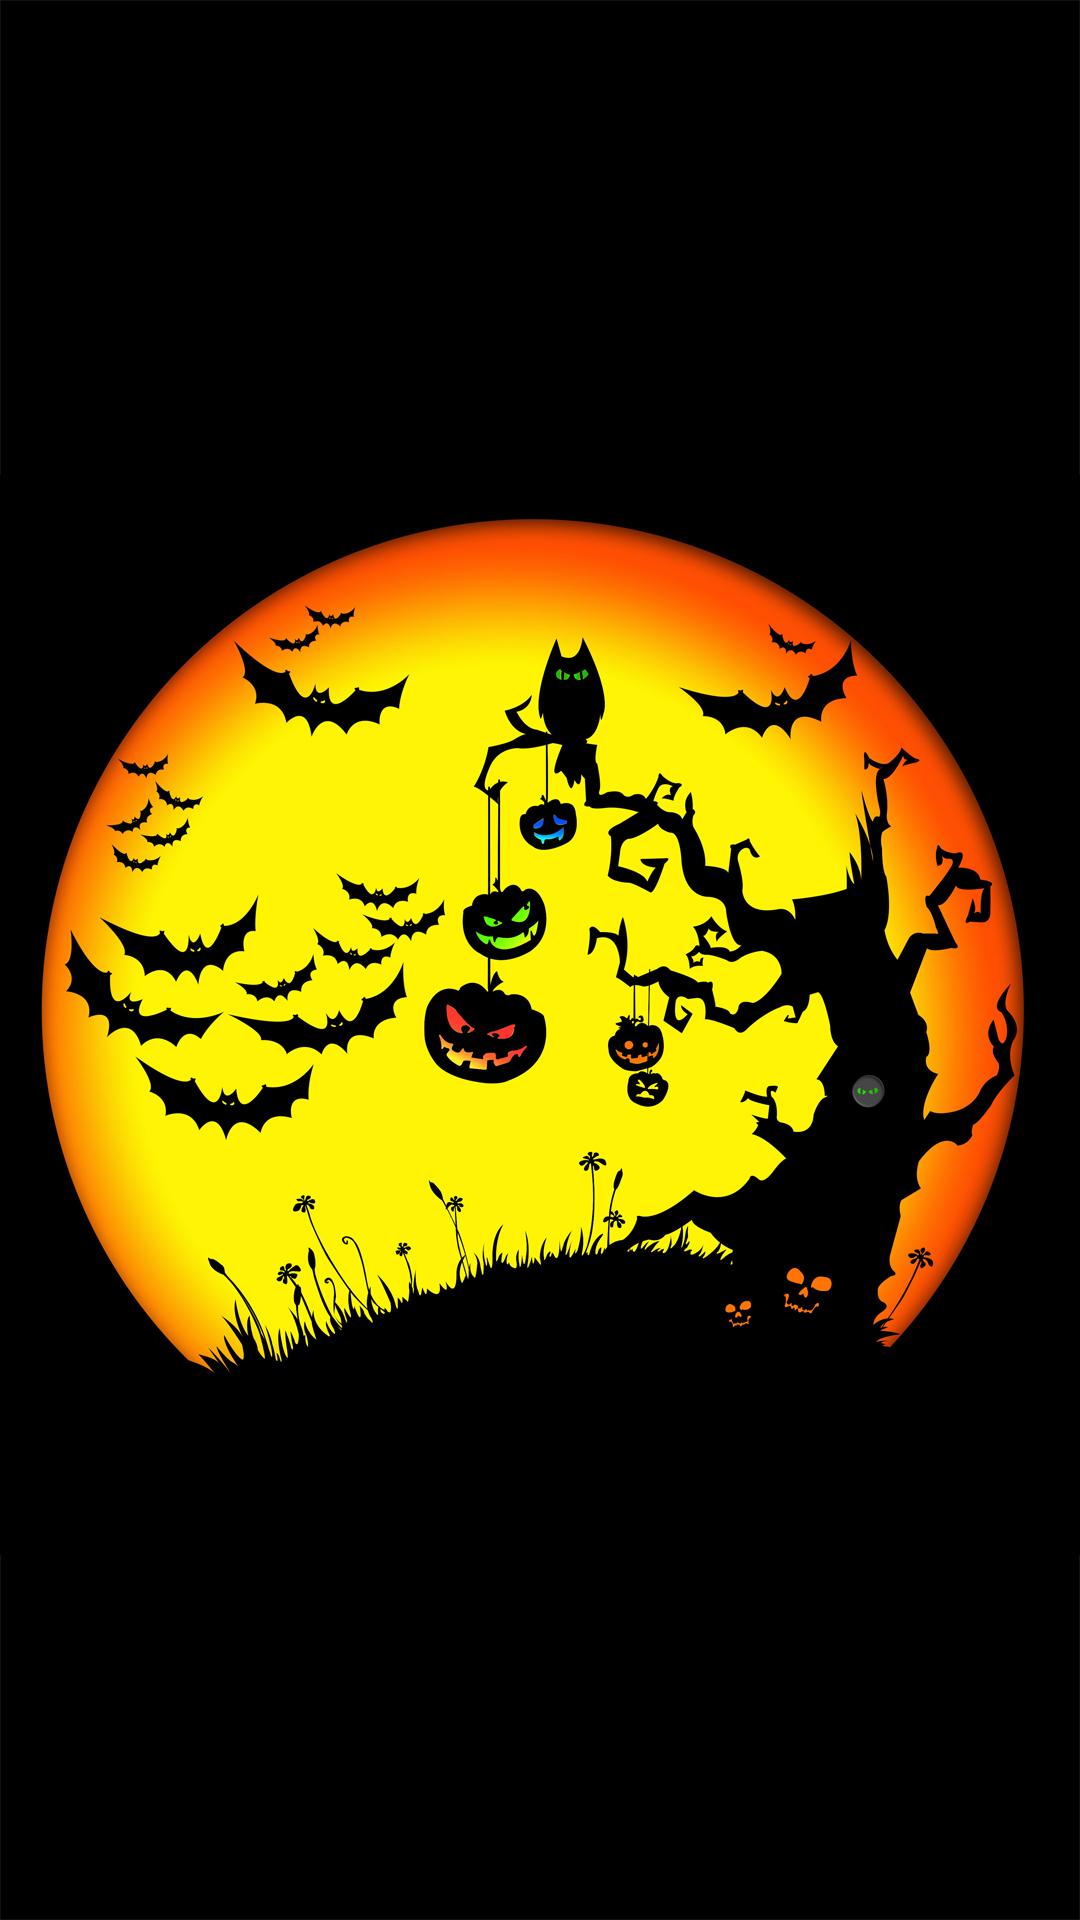 Pumpkin tree Halloween htc one wallpaper, free and easy to download